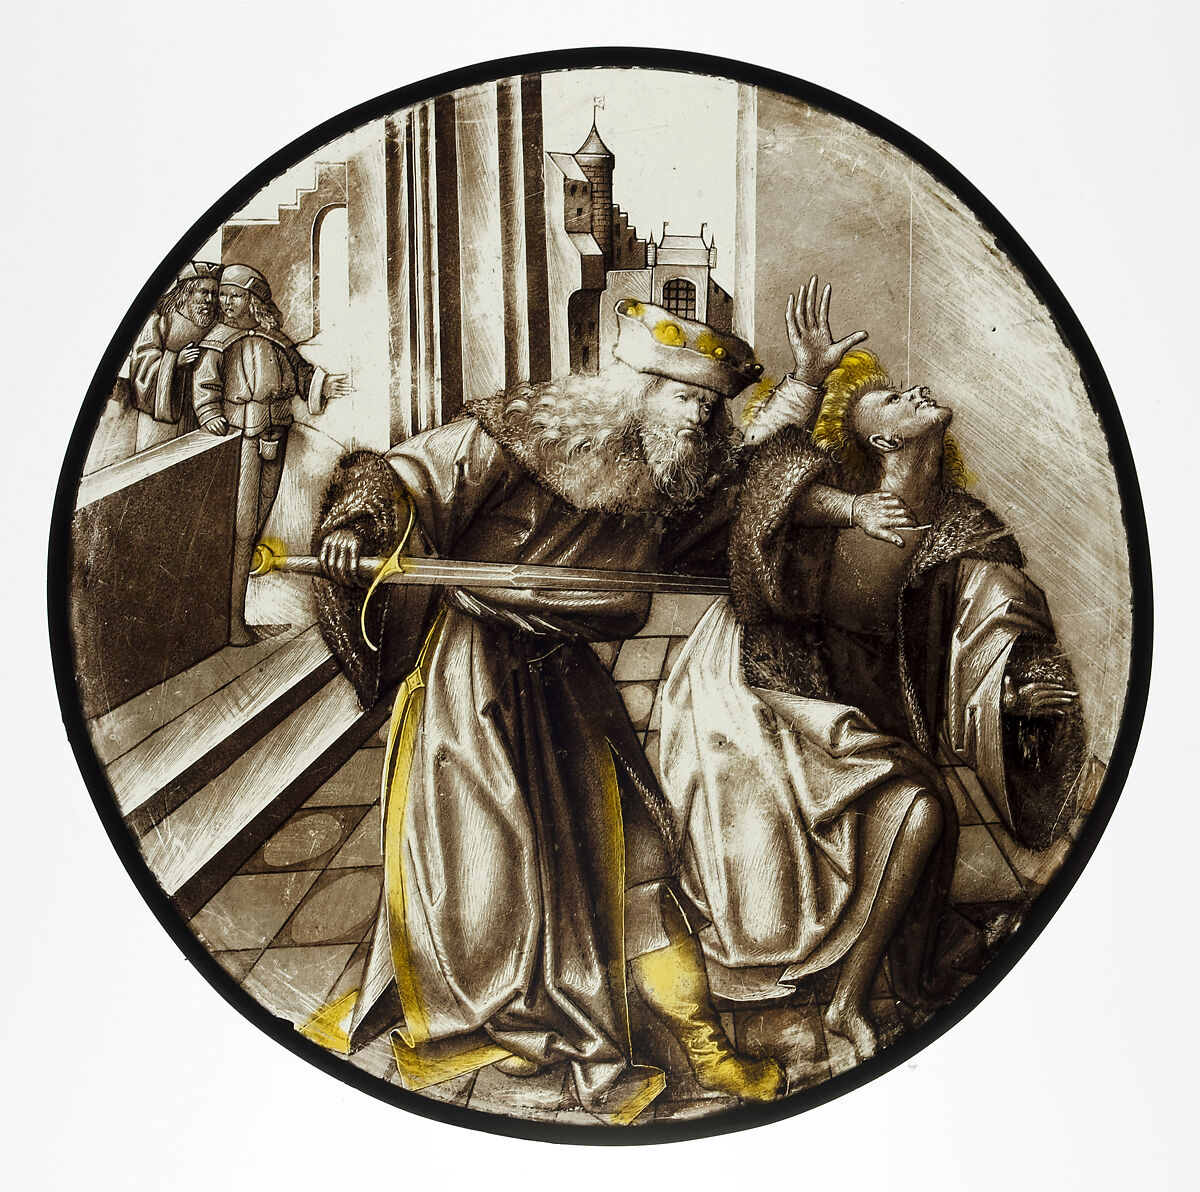 Roundel with Joab Murdering Abner, Colorless glass with silver stain and vitreous paint, North Netherlandish 